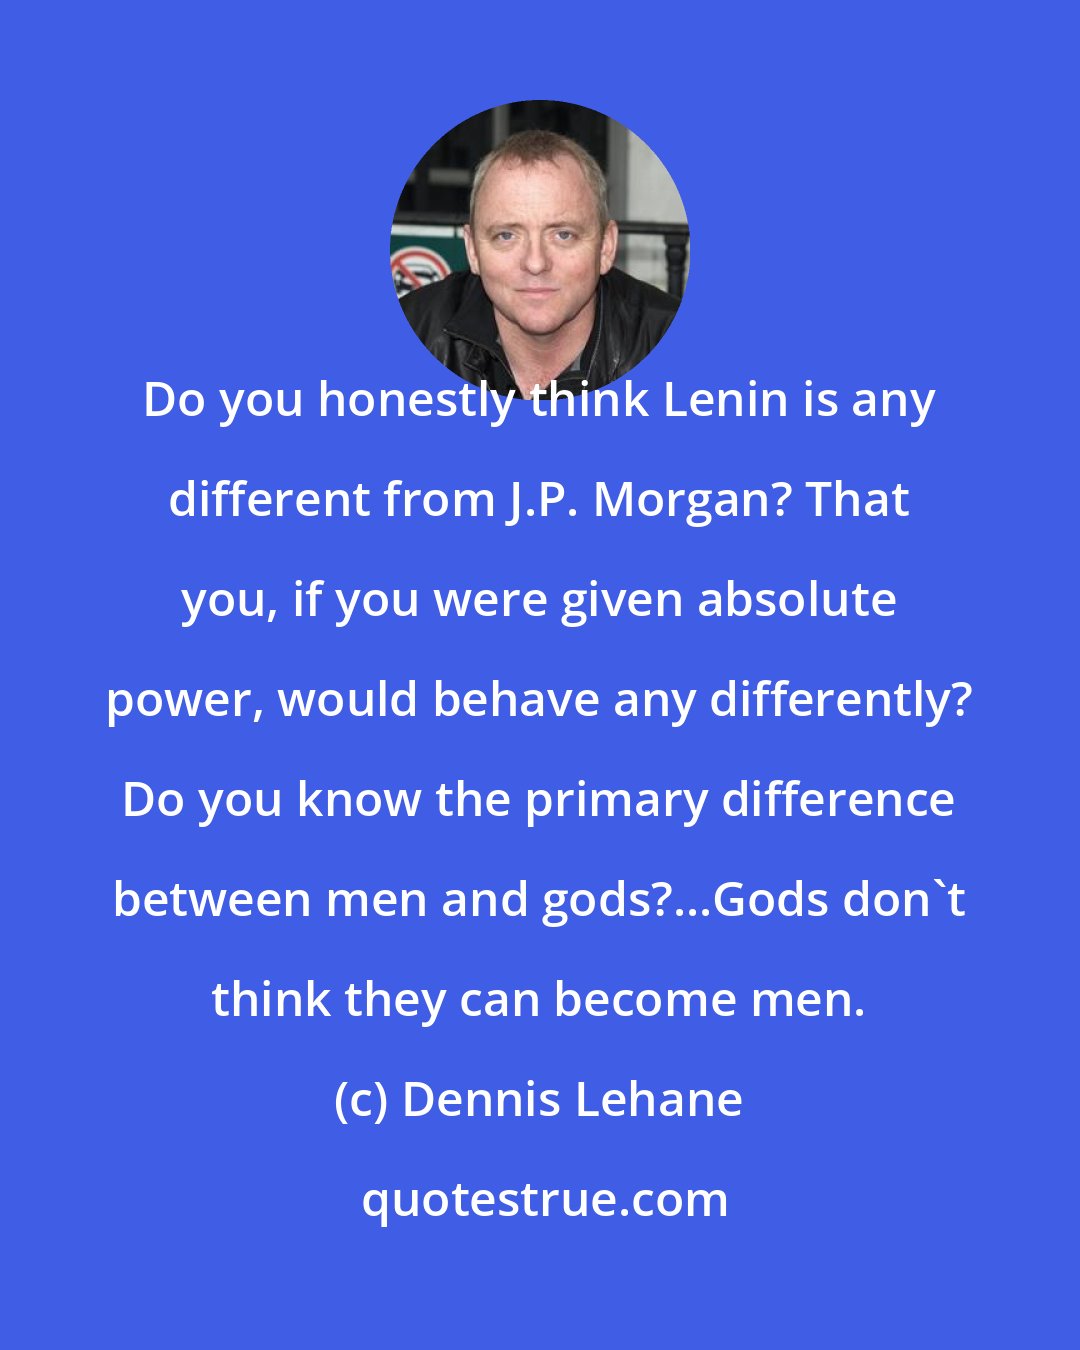 Dennis Lehane: Do you honestly think Lenin is any different from J.P. Morgan? That you, if you were given absolute power, would behave any differently? Do you know the primary difference between men and gods?...Gods don't think they can become men.